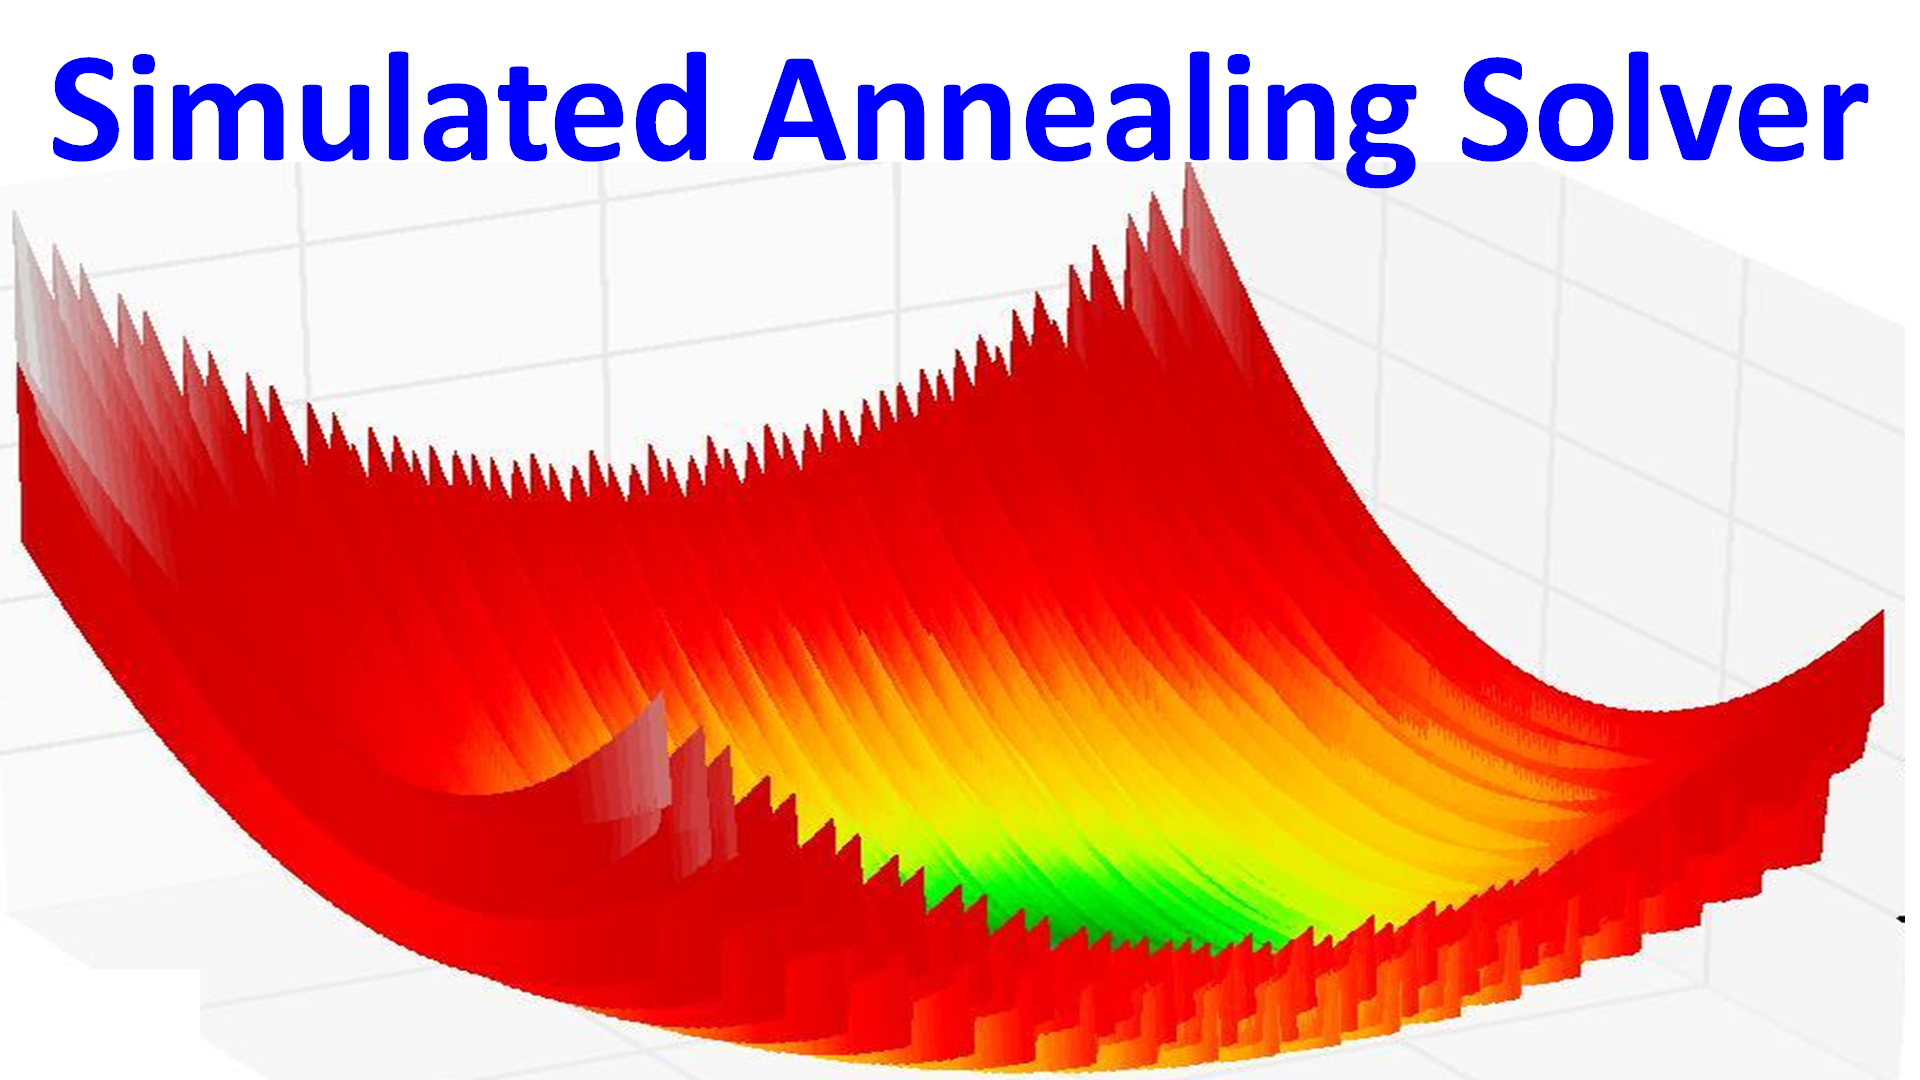 How to Use Simulated Annealing Solver to Solve Optimization Problems